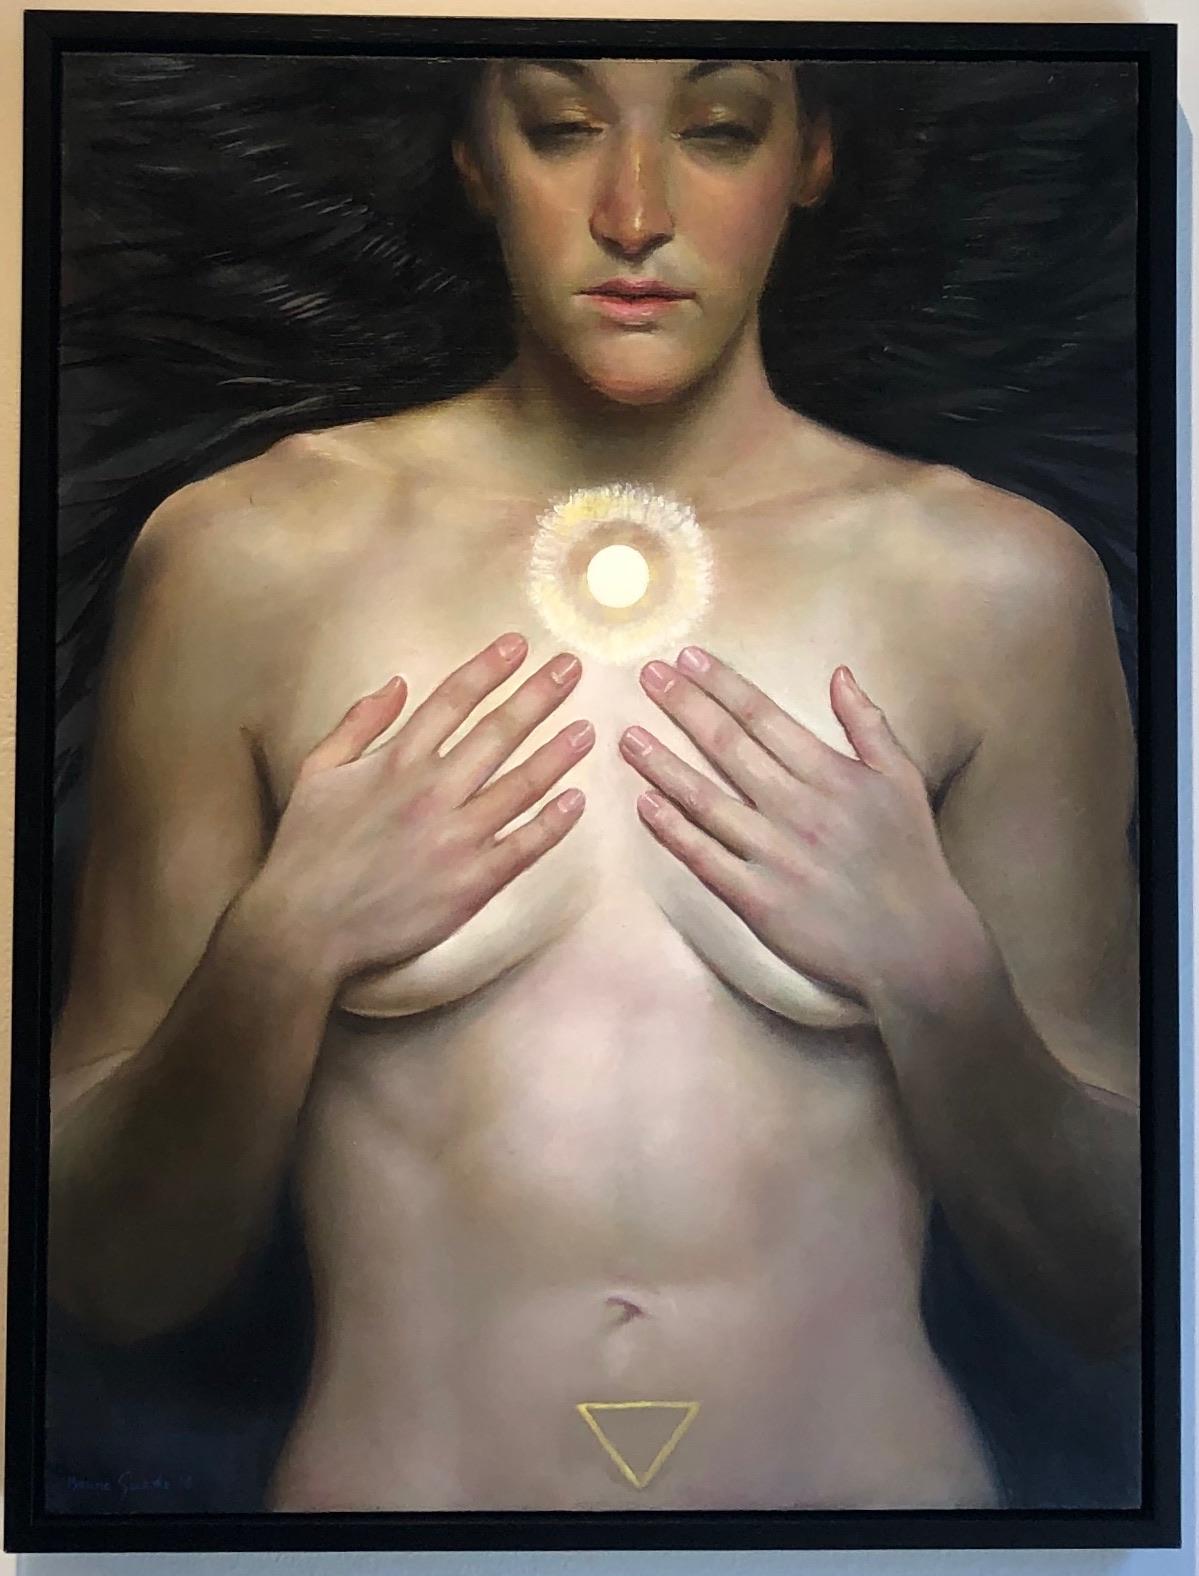 The Oracle, Nude Female with Hands Covering Her Breasts, Long Dark Hair - Contemporary Painting by Bruno Surdo